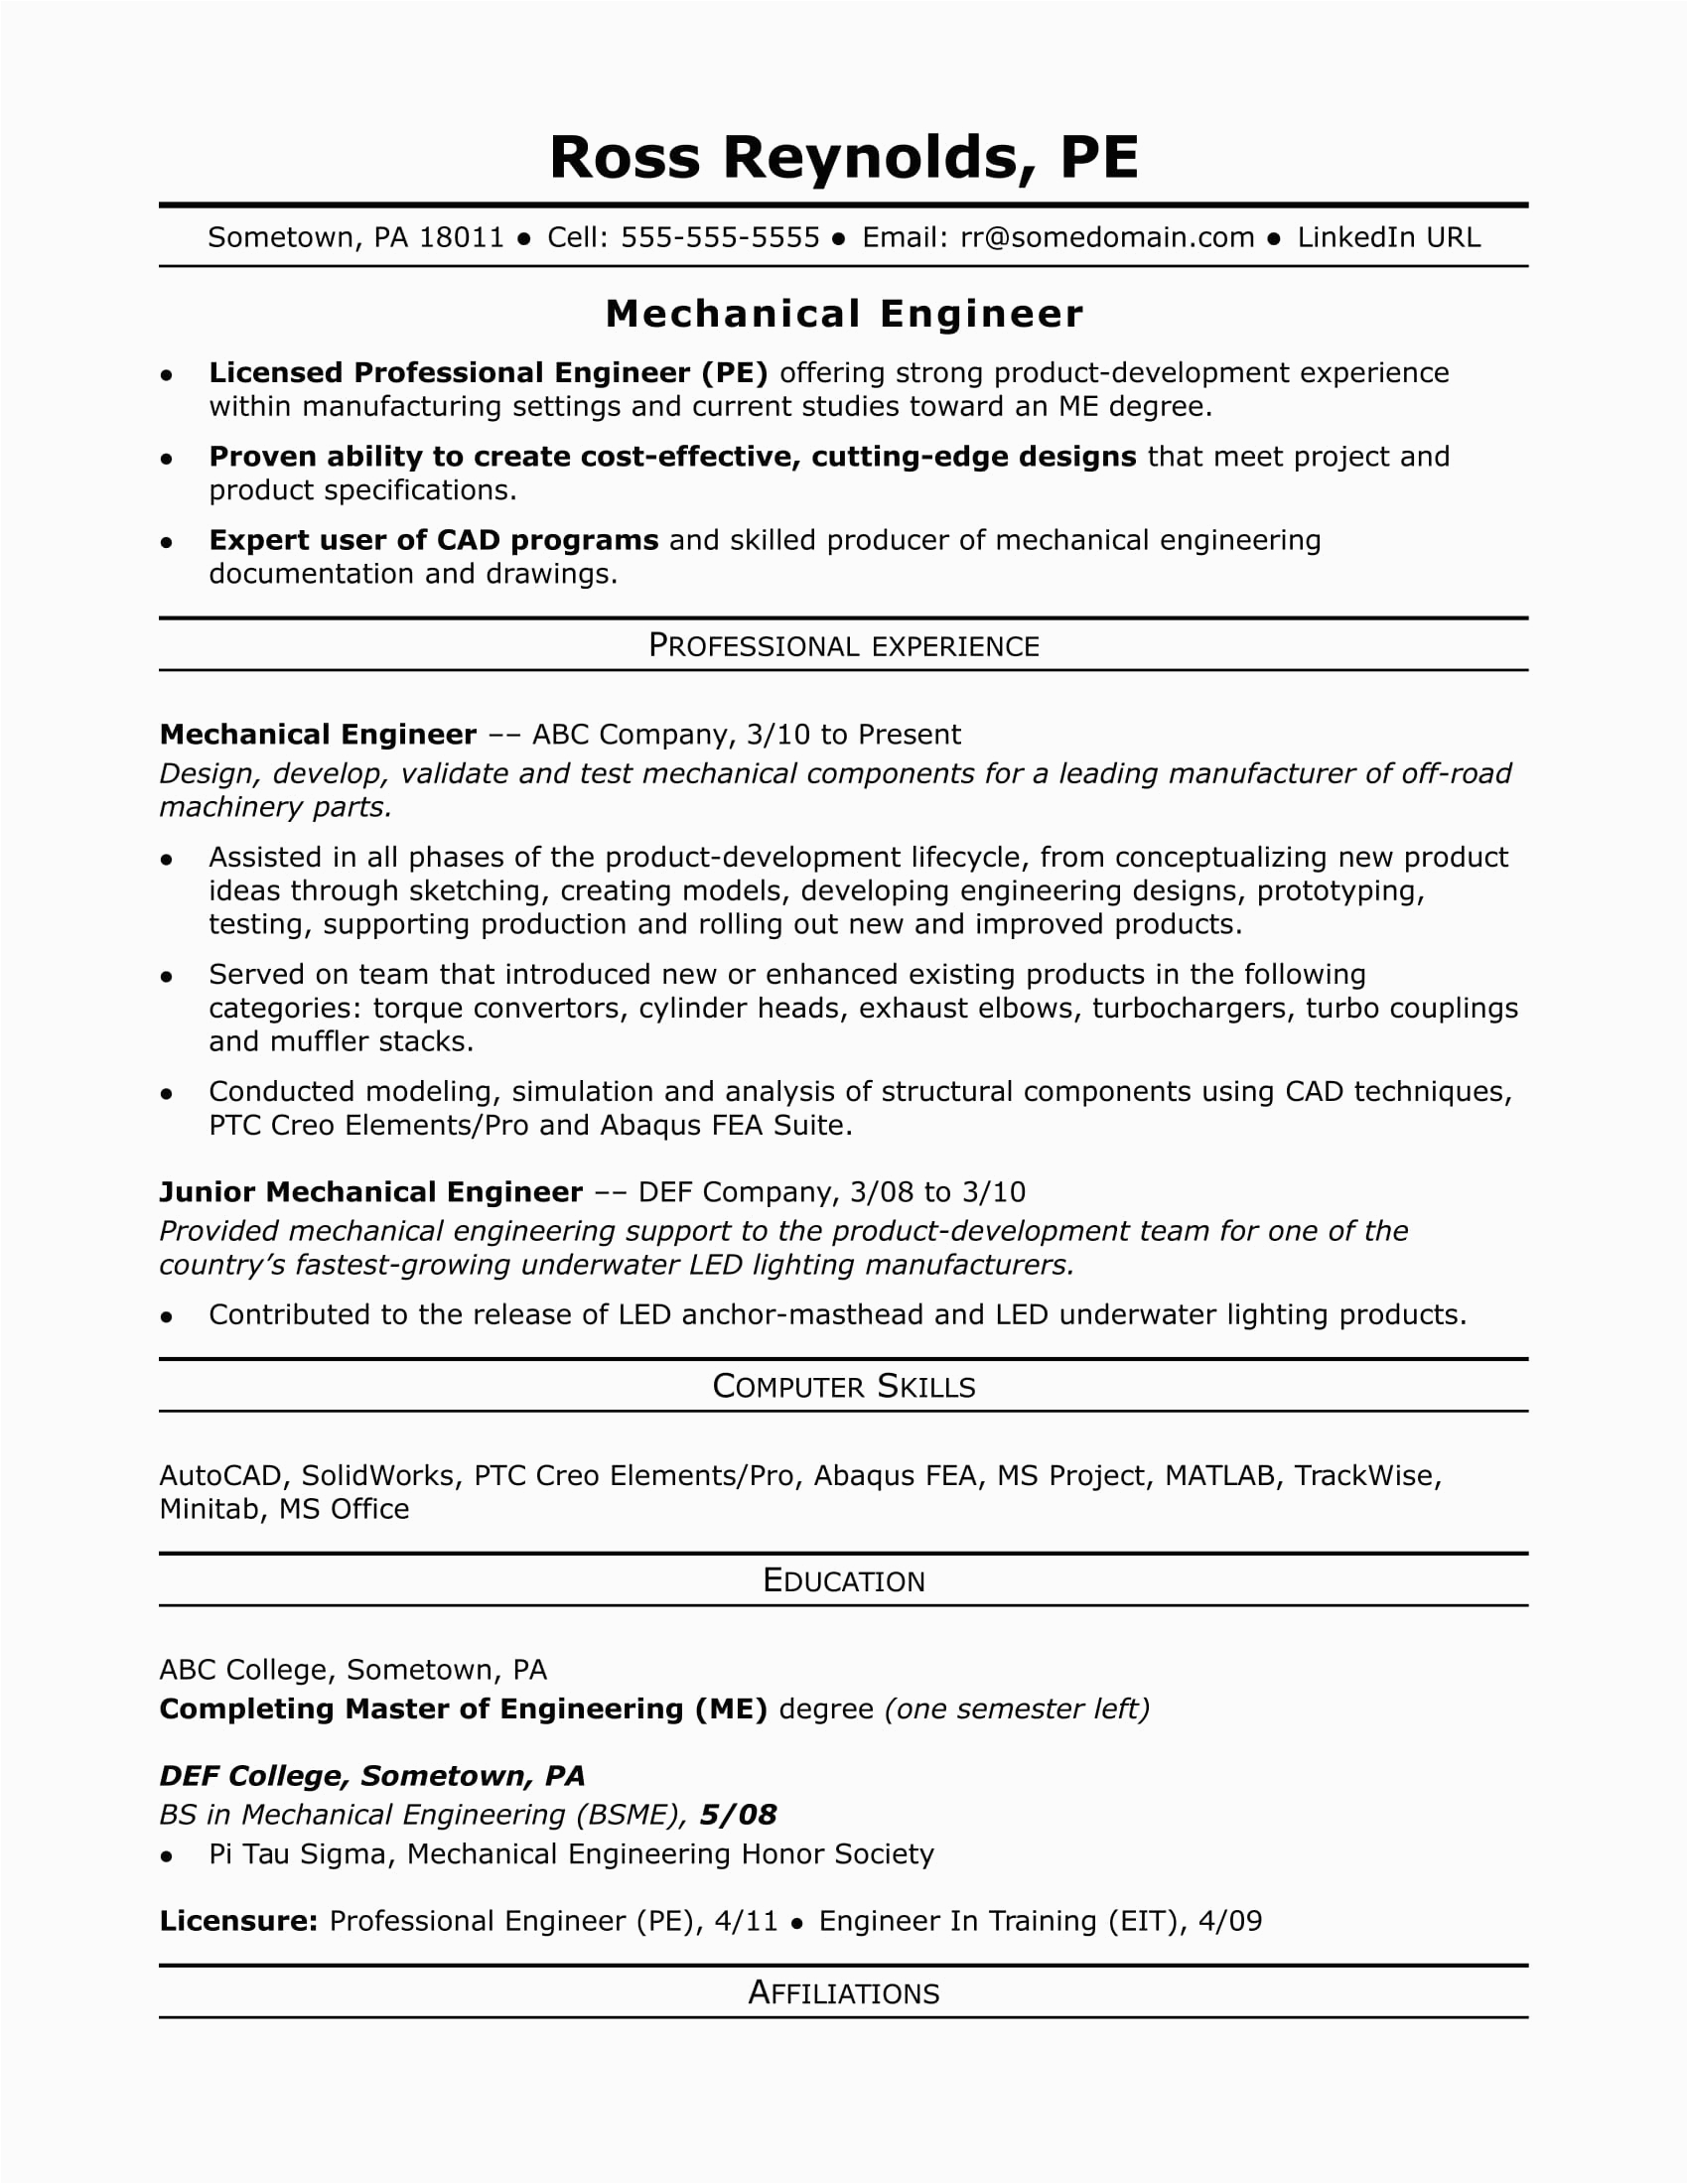 Sample Resume for Experienced Mechanical Engineer Sample Resume for A Midlevel Mechanical Engineer